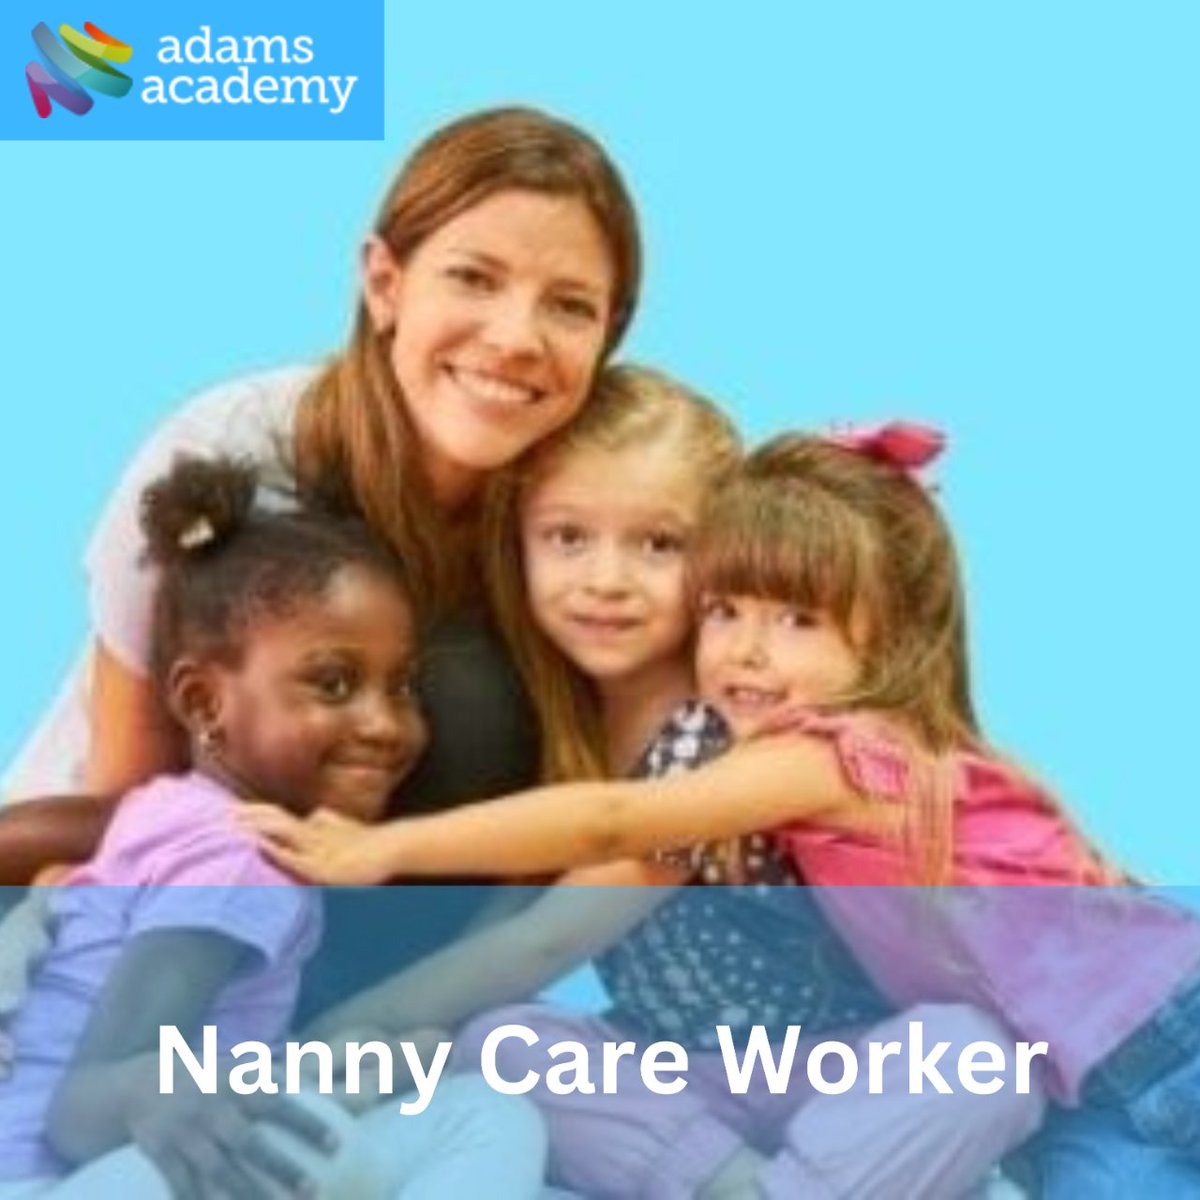 Nurture, care, and create a joyful learning environment for little ones with Adams Academy’s Nanny Care Worker course. Start a rewarding career filled with smiles and growth. Join us to become a guiding star in a child's life! 
#NurturingTheFuture #NannyCare #AdamsAcademy